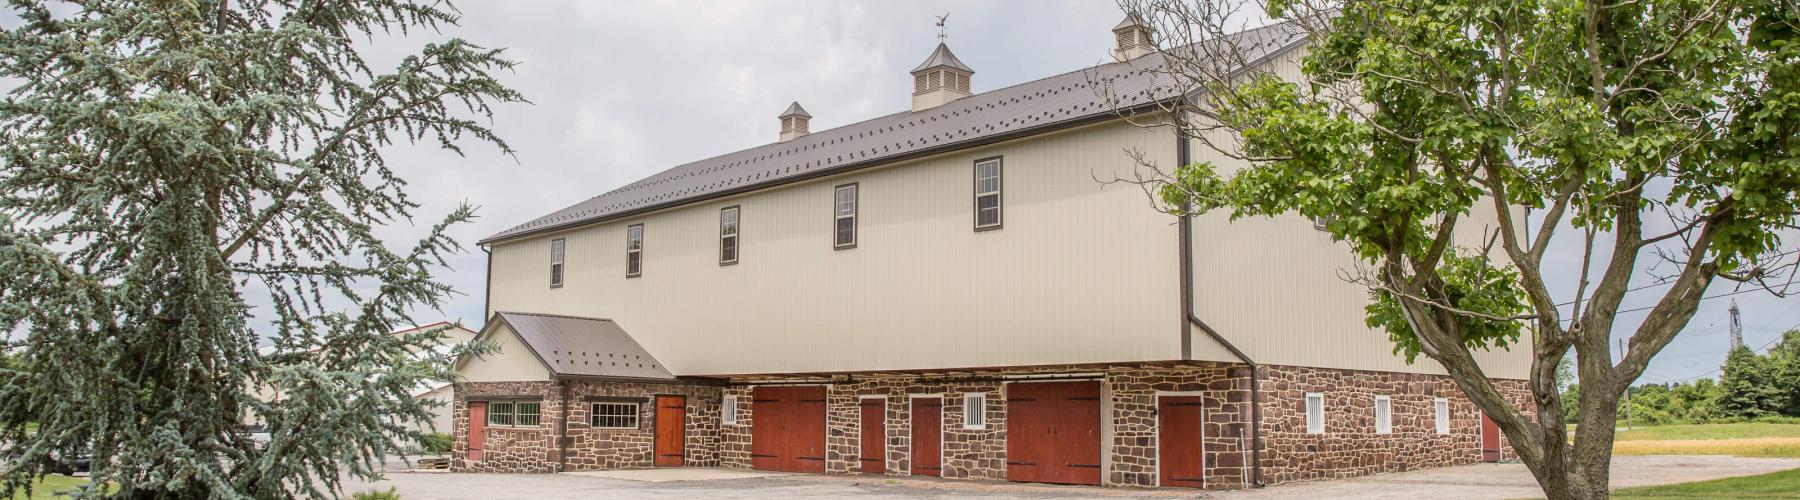 Bank barn renovated by Stable Hollow Construction.